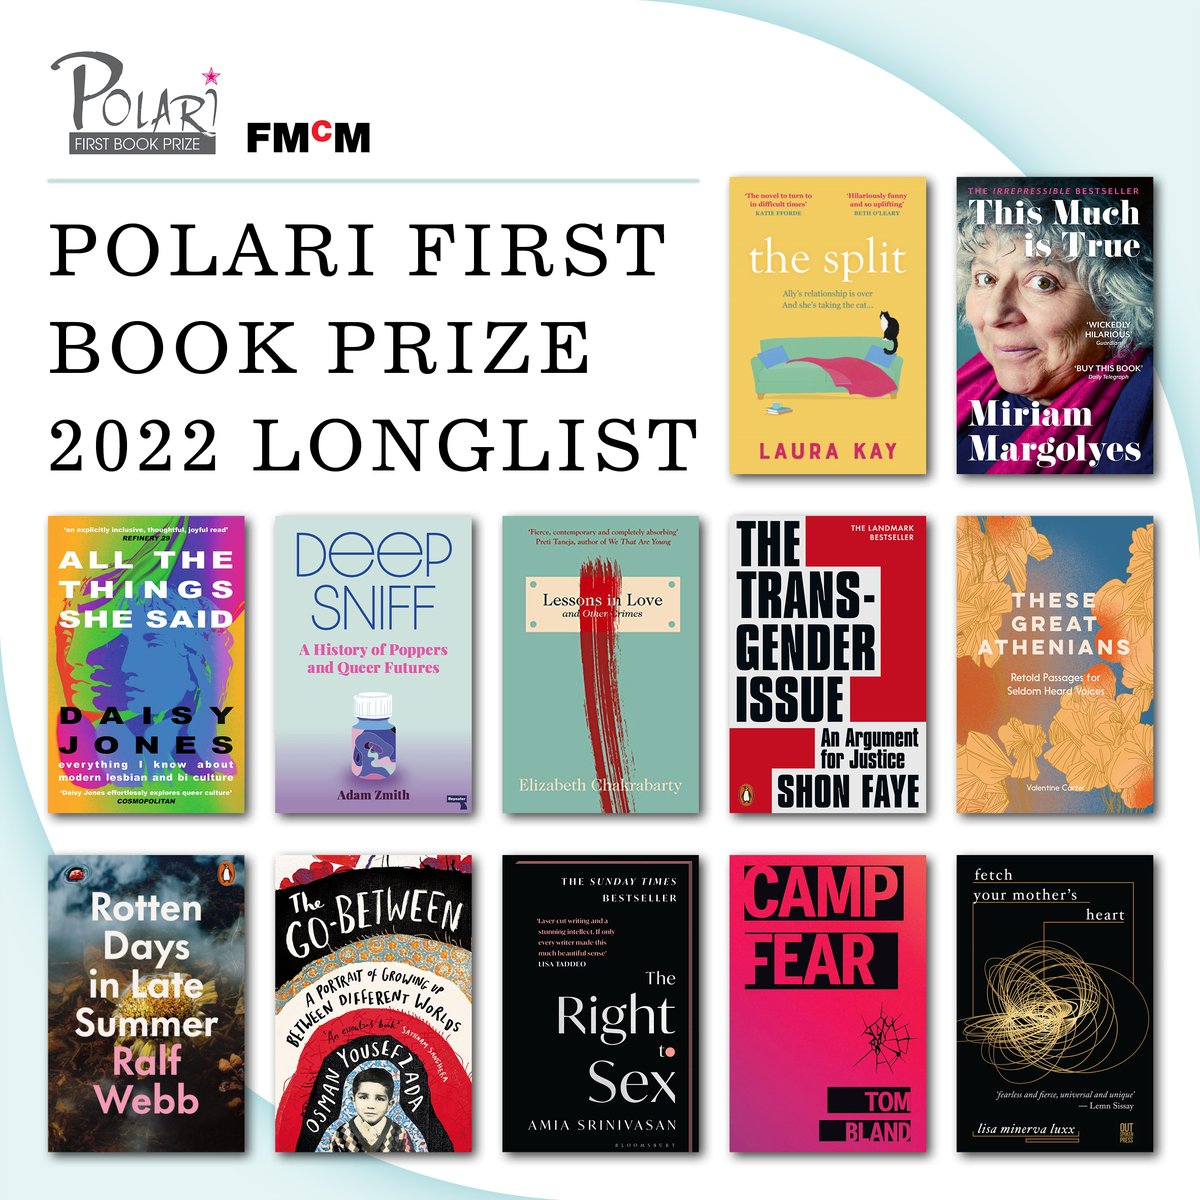 Introducing the Polari First Book Prize longlist: The Split - @lauraelizakay (@QuercusBooks) This Much is True - Miriam Margolyes (@johnmurrays) All The Things She Said - @daisythejones (@CoronetBooks) Deep Sniff - @AdamZmith (@RepeaterBooks)